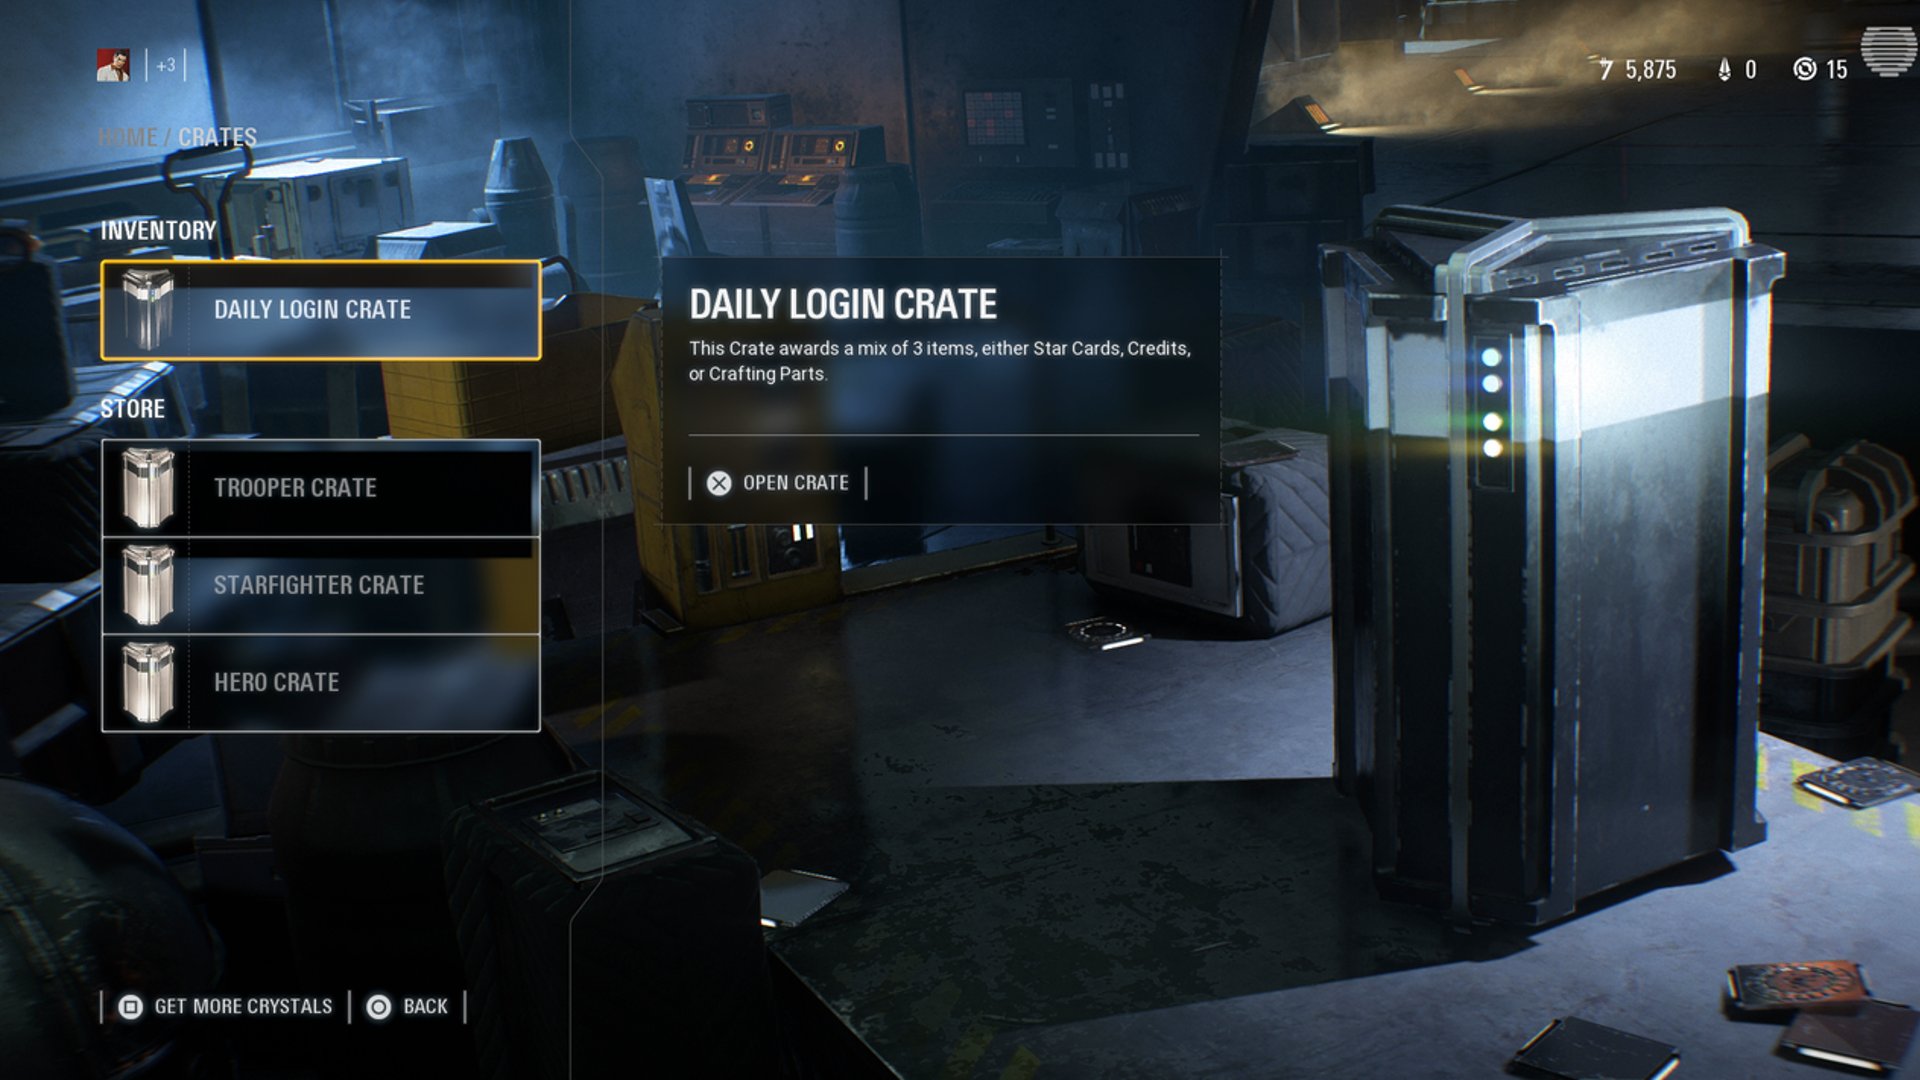 A lootbox menu can be seen from Battlefront 2